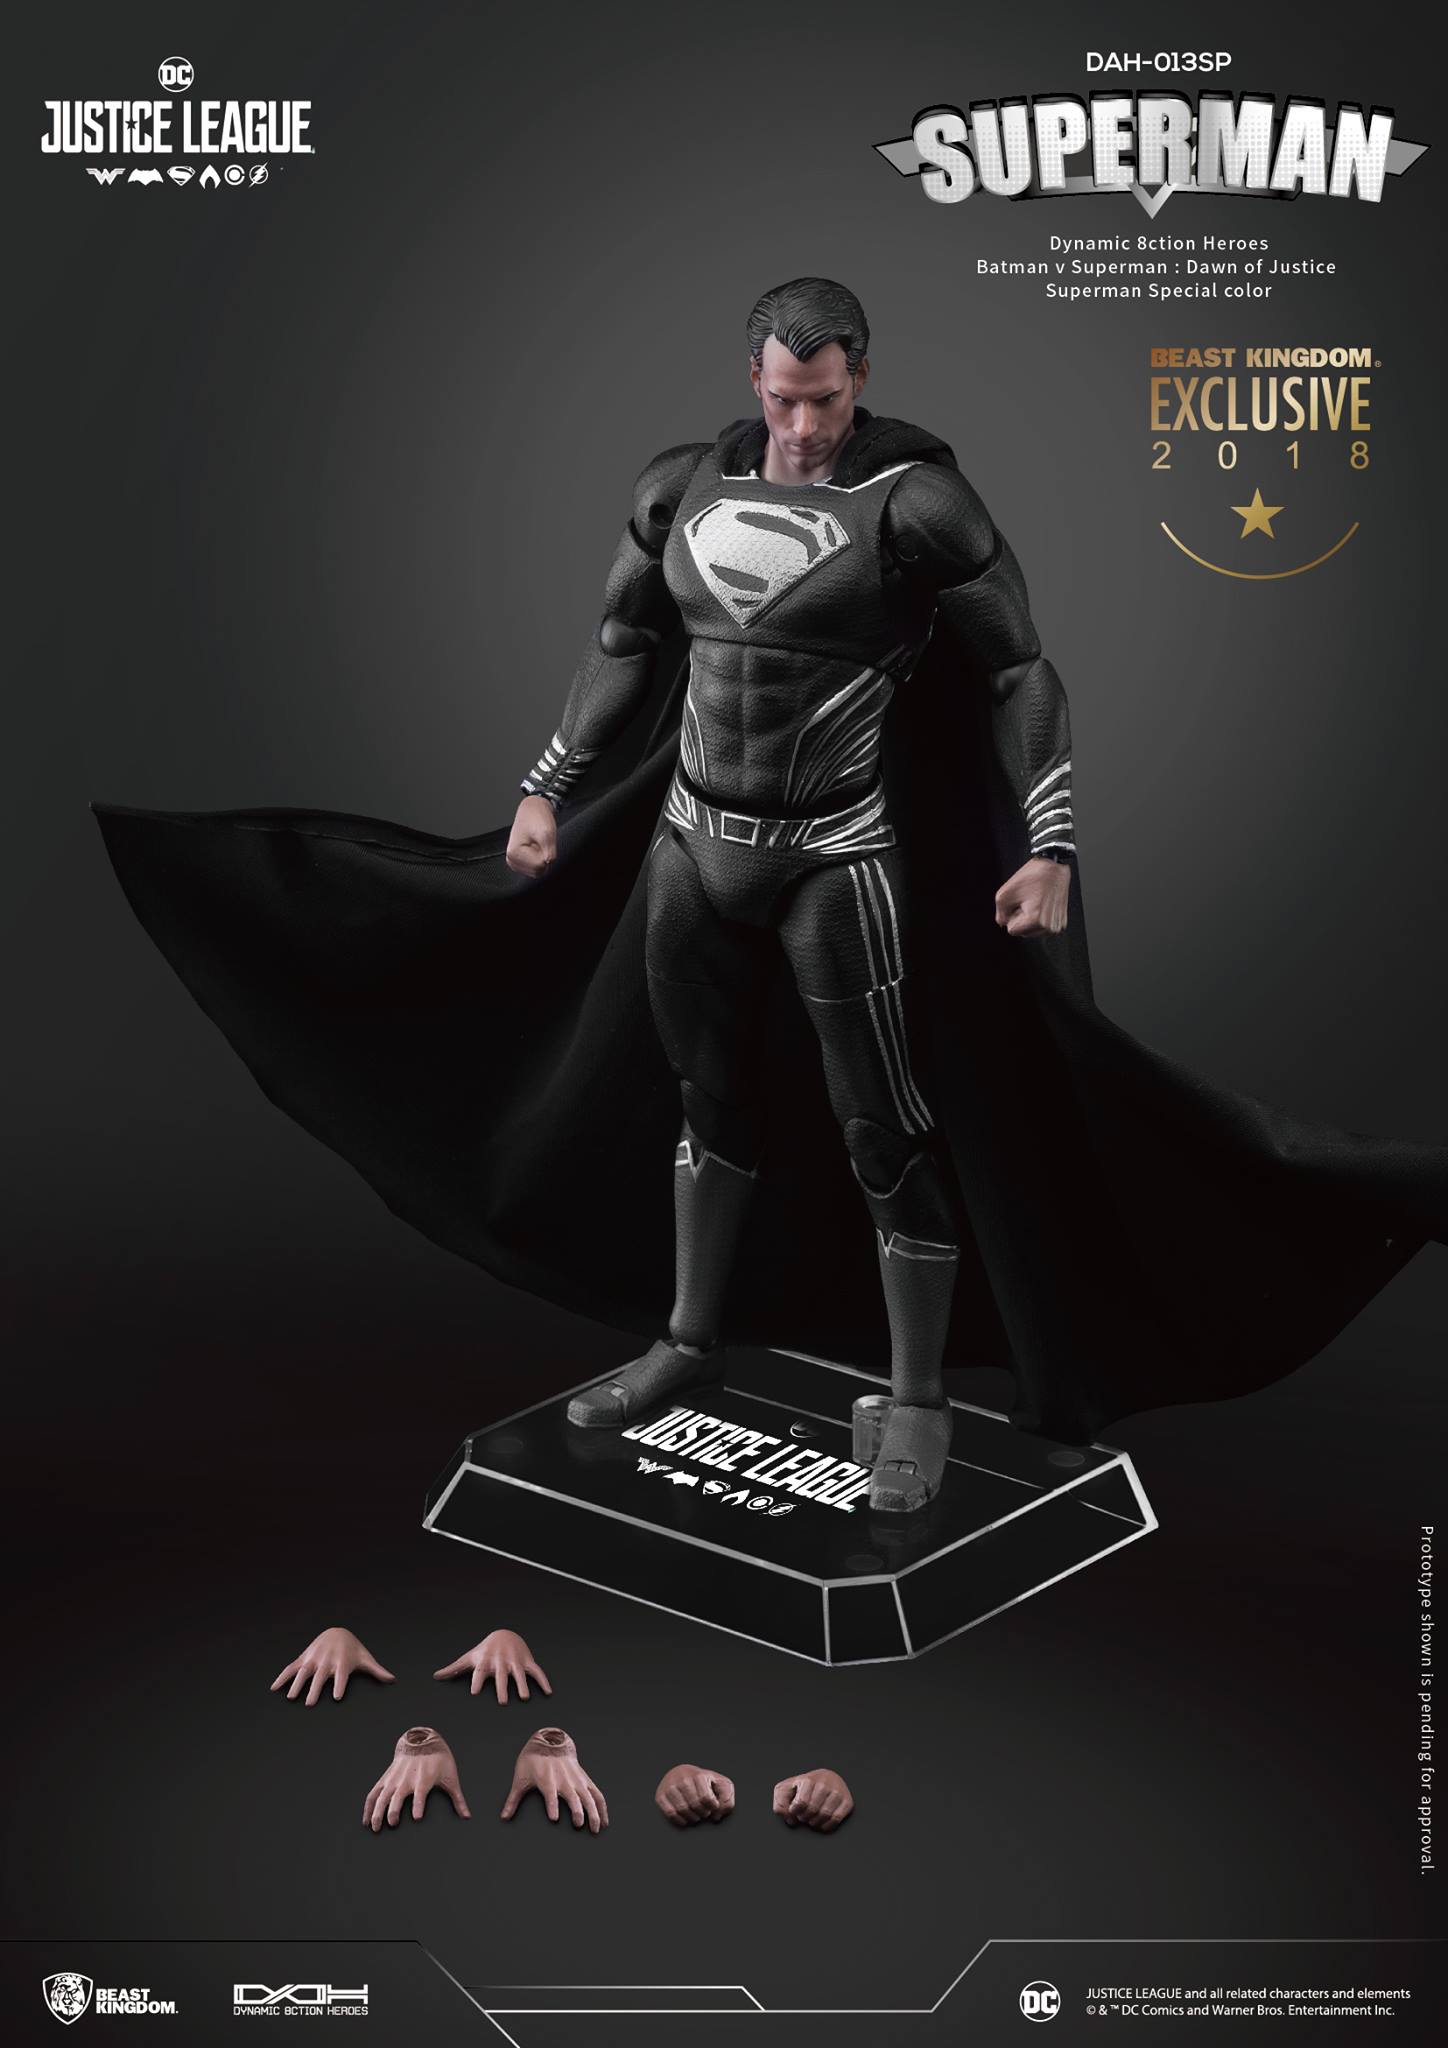 Justice League - Superman Black Suit Special Color (Dynamic 8ction Heroes / Beast Kingdom) HWFFOmU2_o